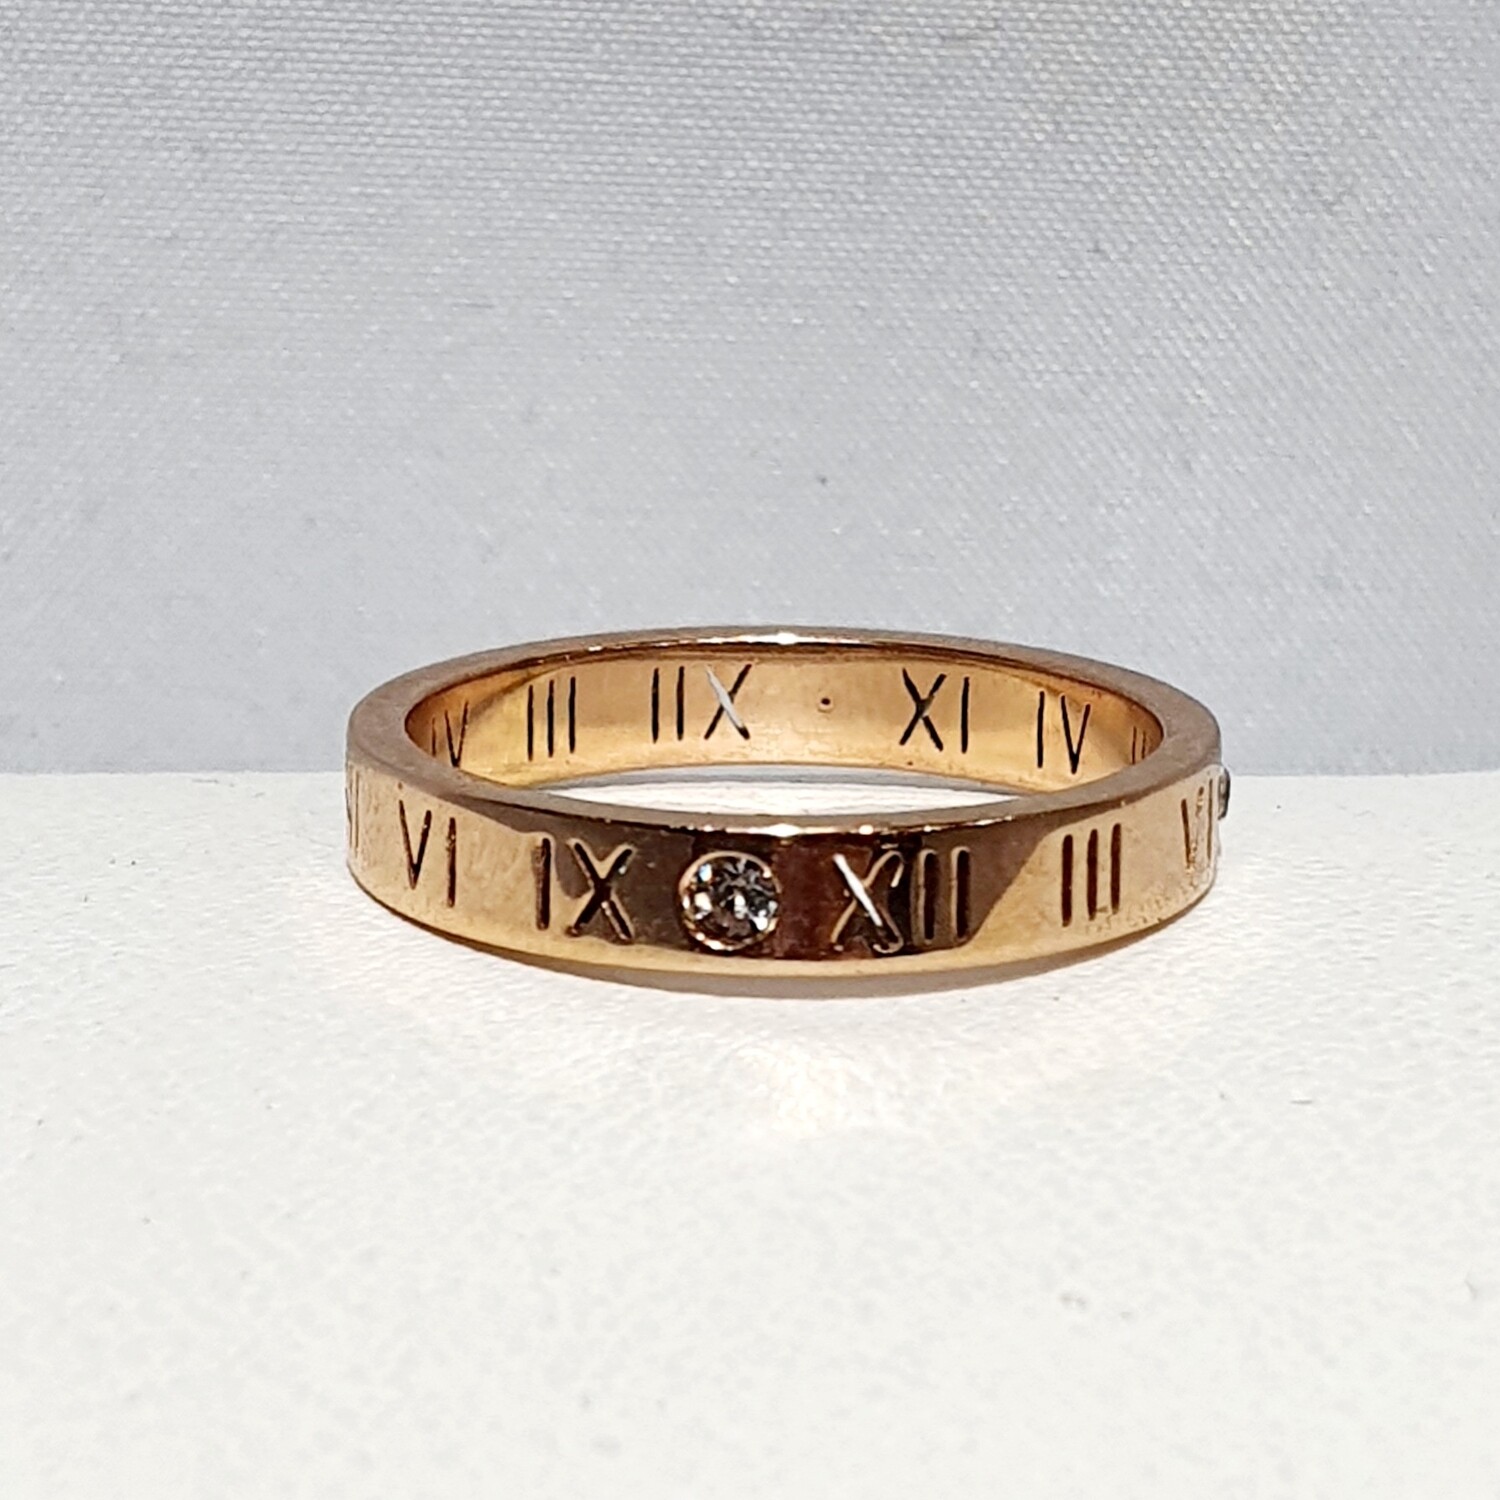 Buy Roman Numeral Custom Date Ring. Personalized Wedding Date Birthday Ring.  Stackable Ring. SILVER, GOLD or ROSE Gold Filled. Sterling Silver. Online  in India - Etsy